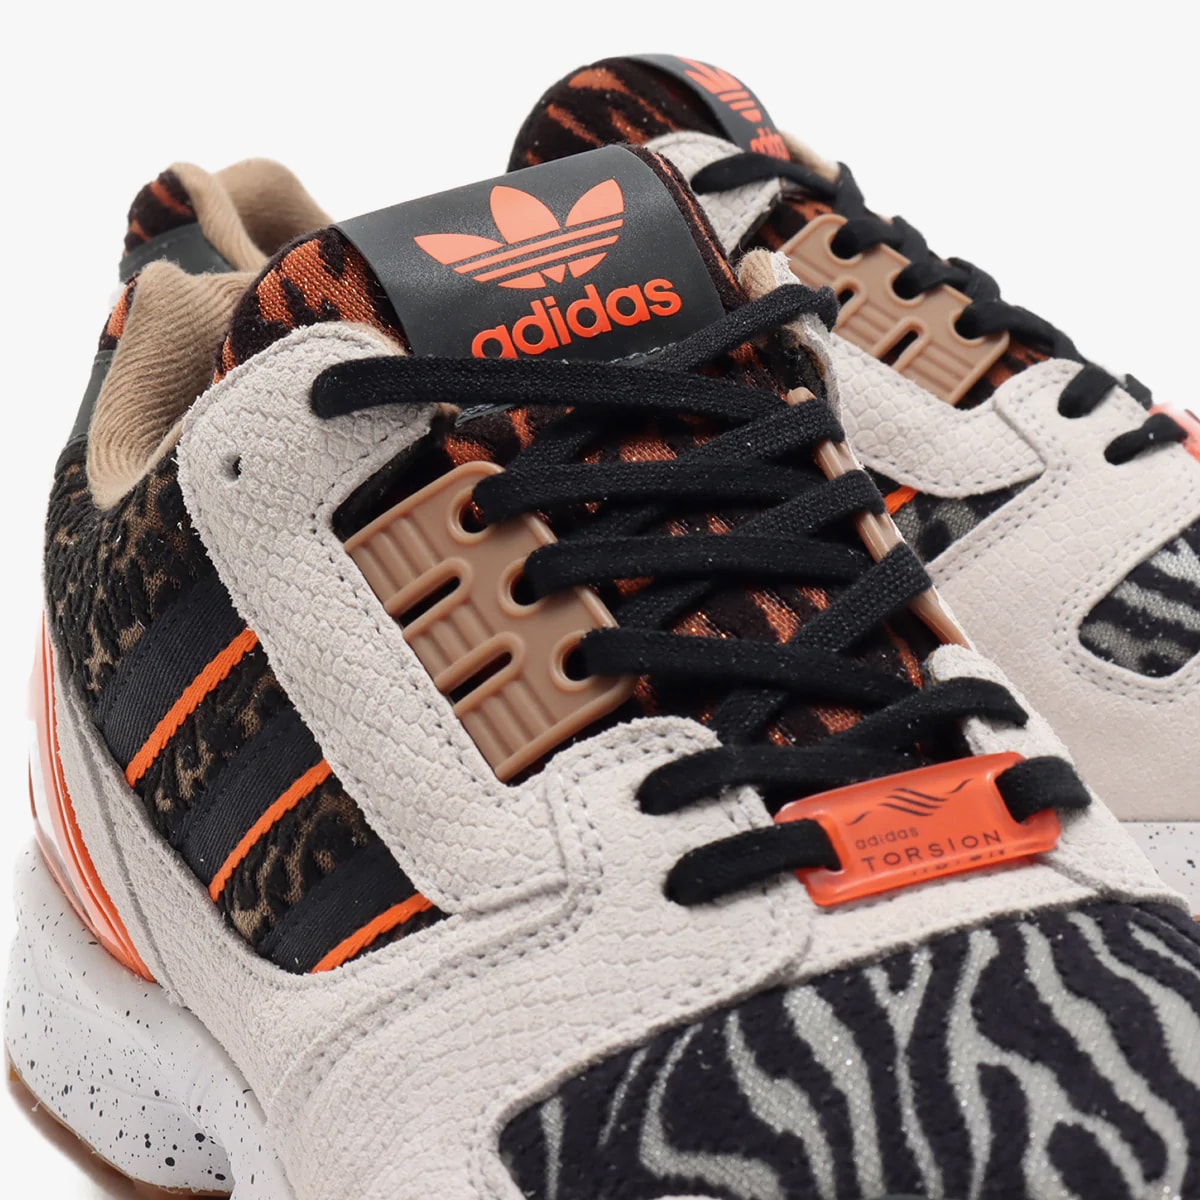 atmos adidas originals zx 8000 crazy animal fy5246 zebra tiger leopard panther snake official release date info photos price store list buying guide